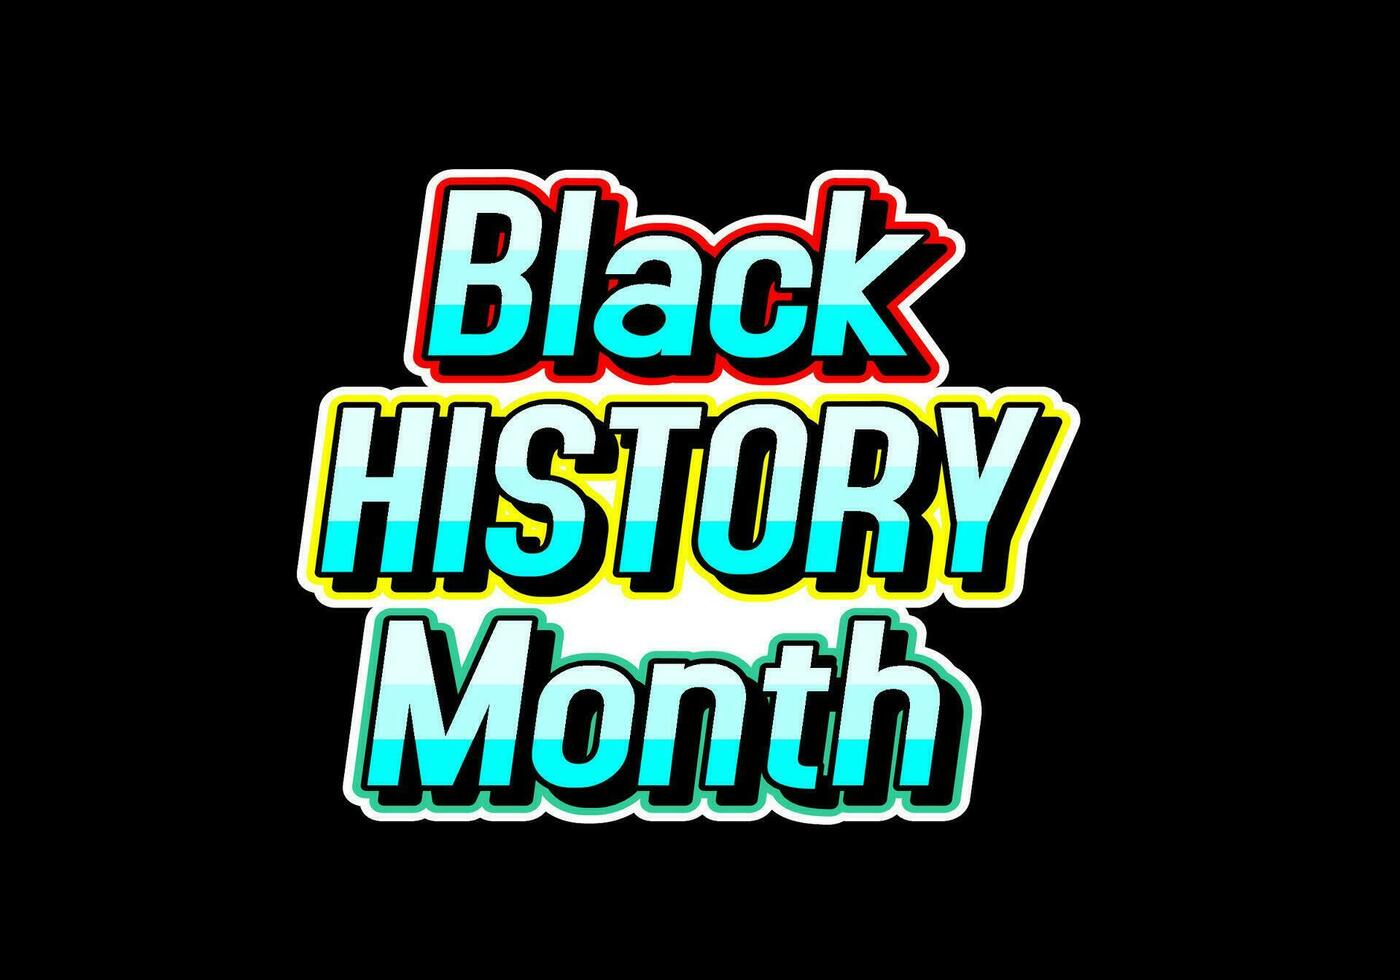 Black history month, text effect vector